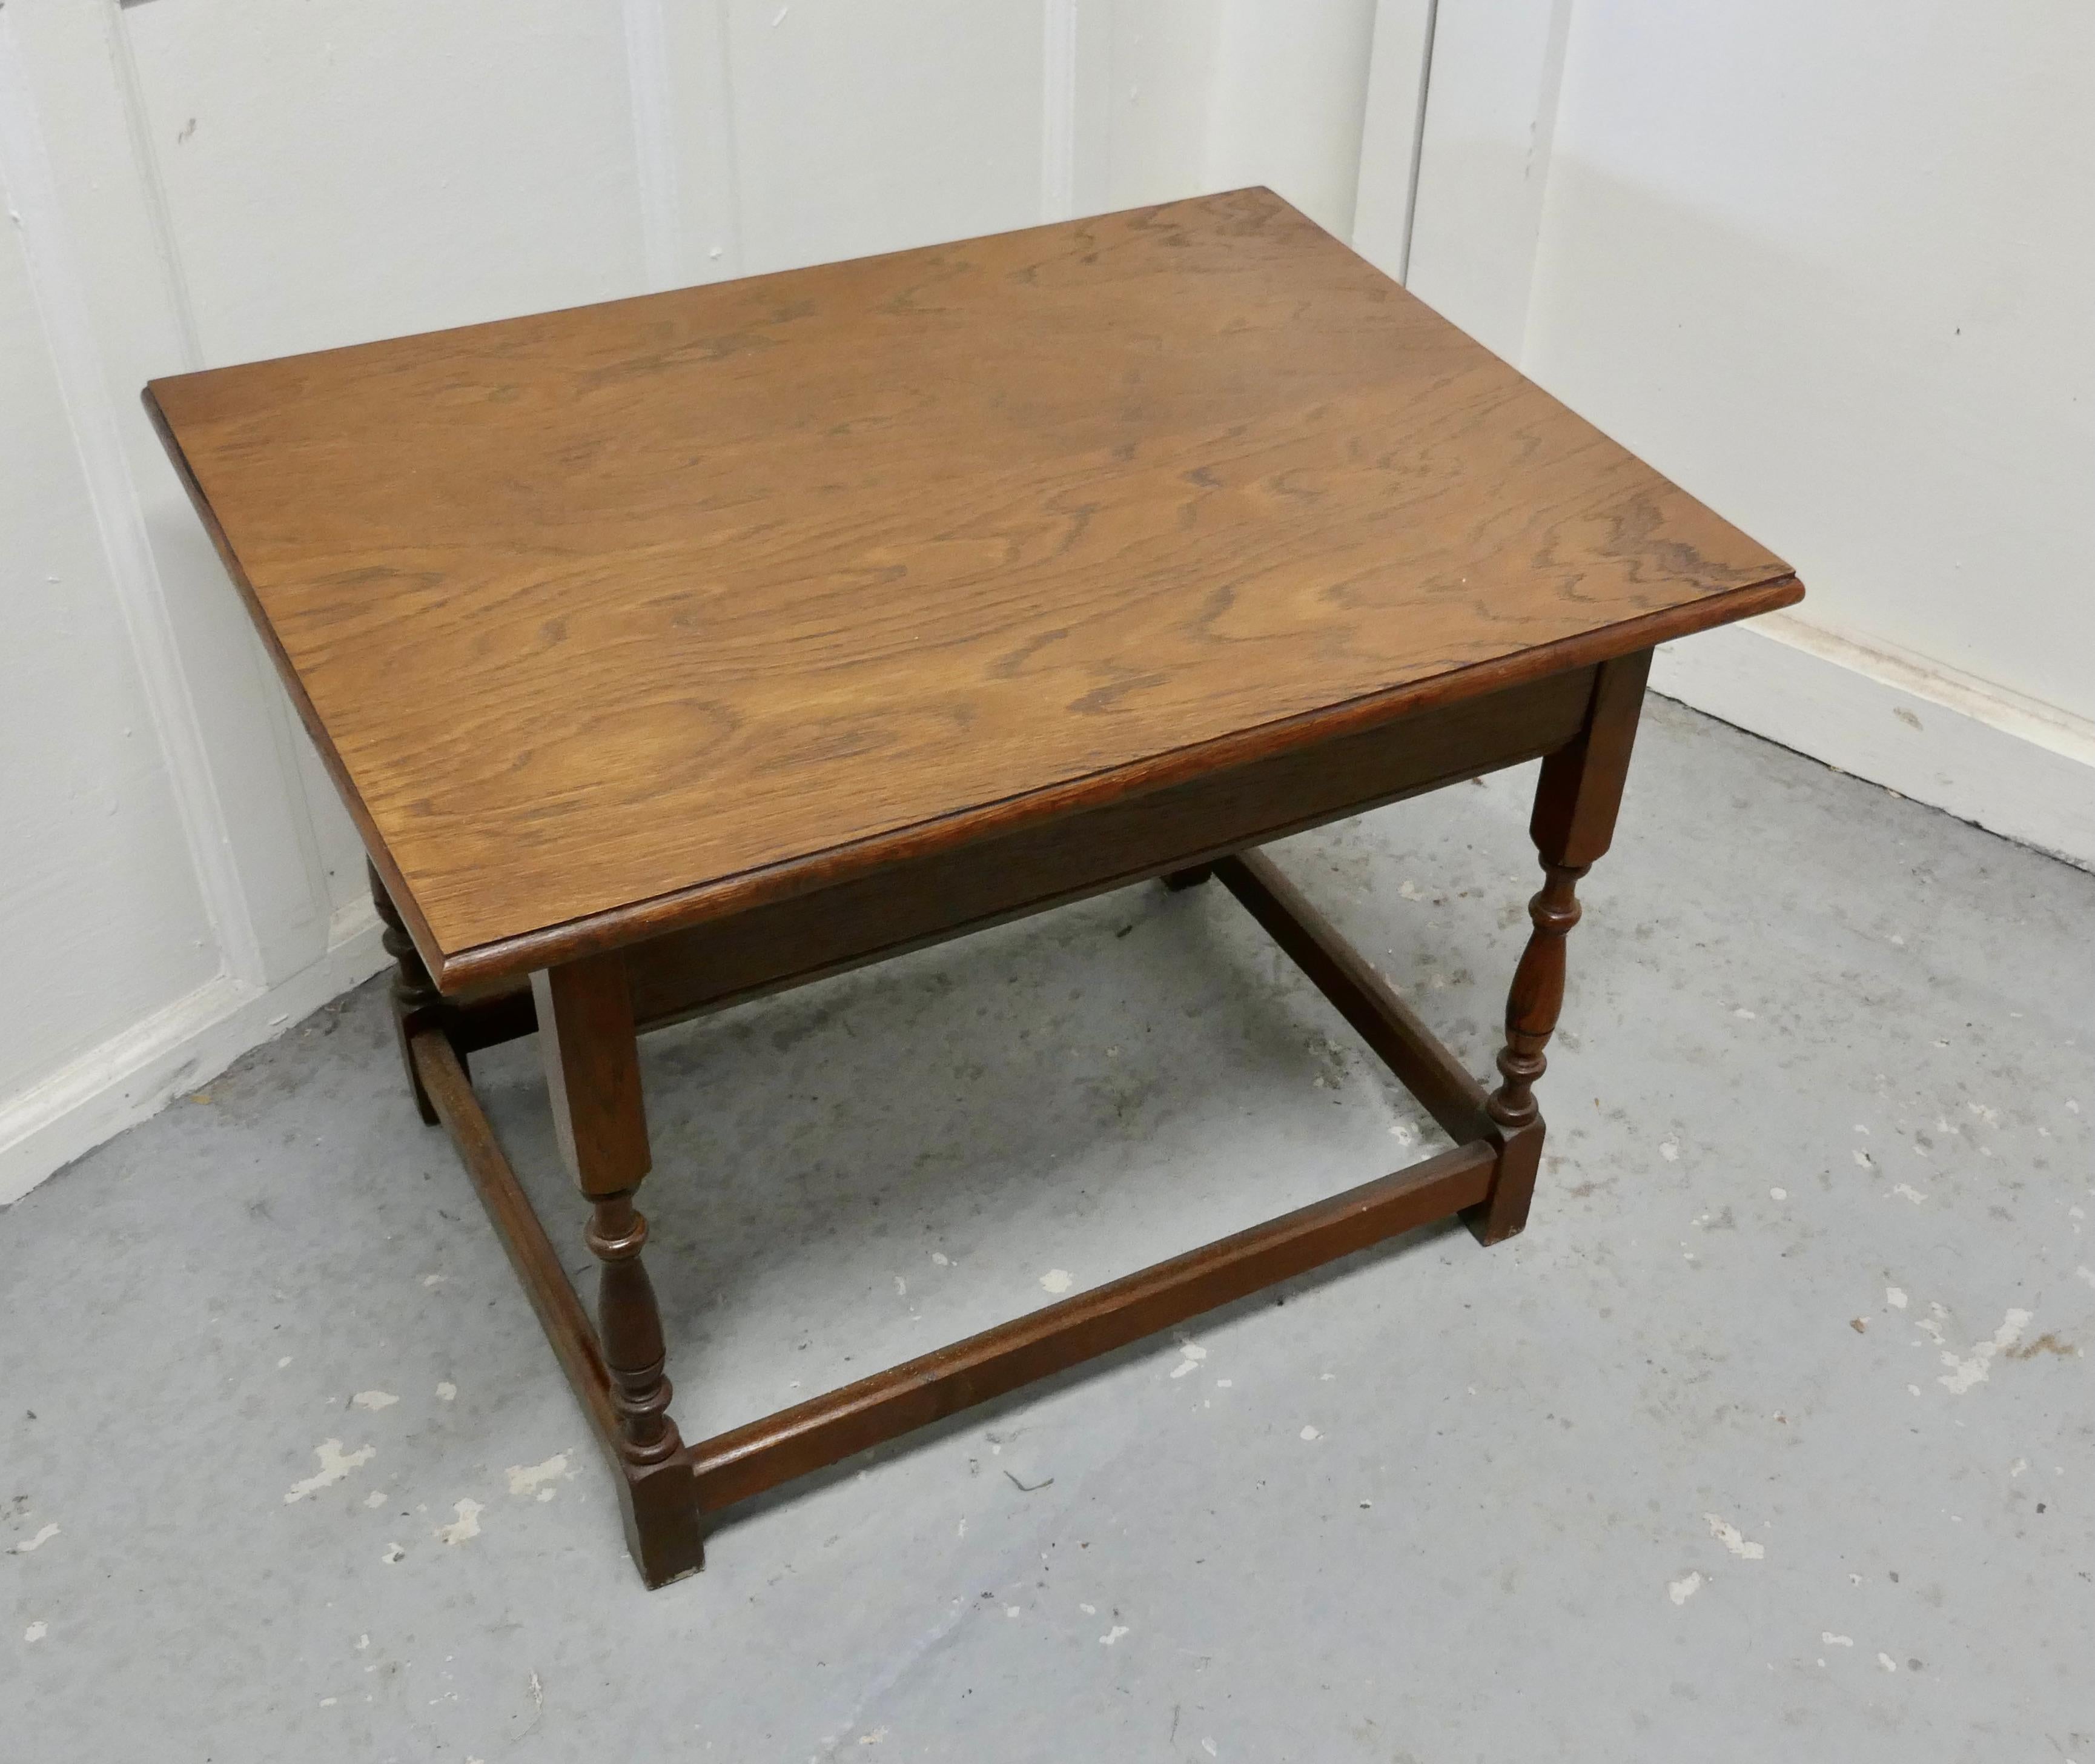 Late Victorian golden oak occasional side table

This is a good quality piece made about 1900, with low stretchers and standing on turned legs

An elegant table with a good colour and a lovely patina, in good condition
The table is 20” high,